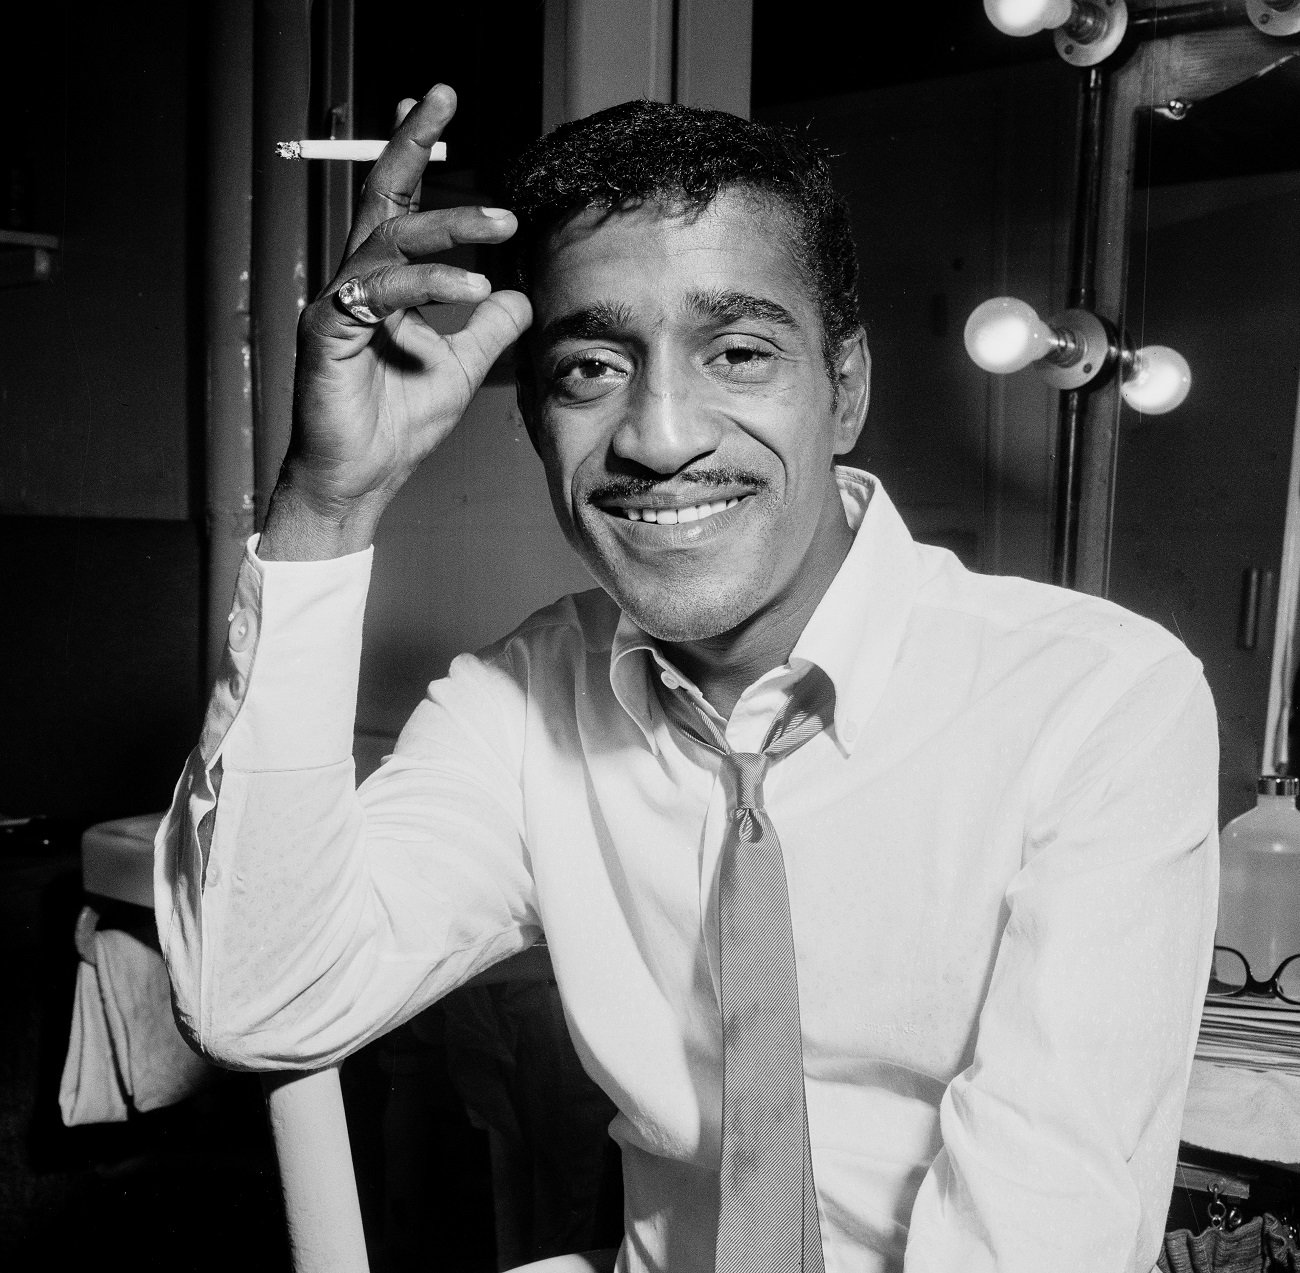 A black and white picture of Sammy Davis Jr. wearing a shirt and tie and holding a cigarette.